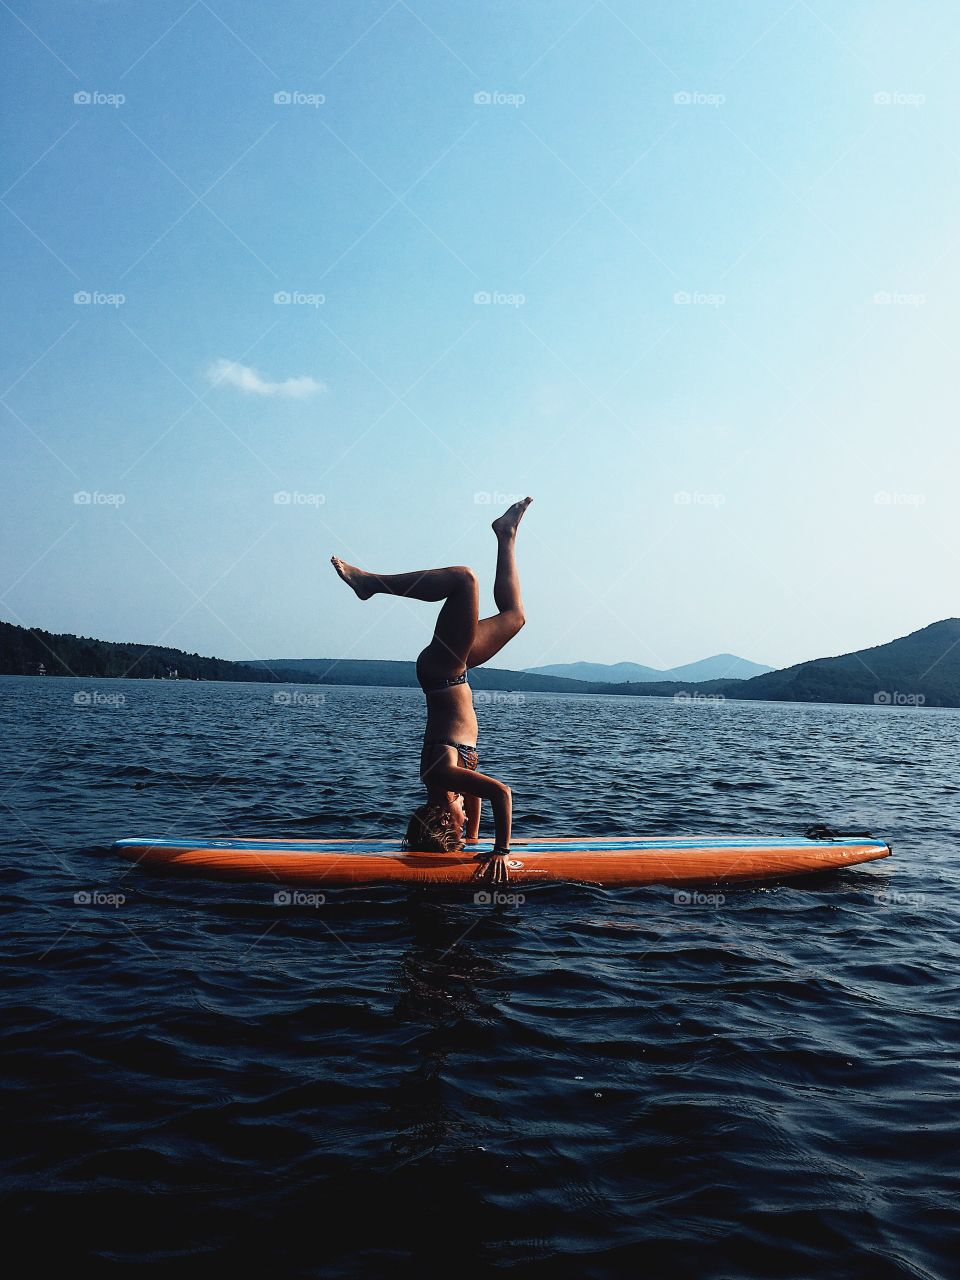 paddle boarding hand stand on blue water